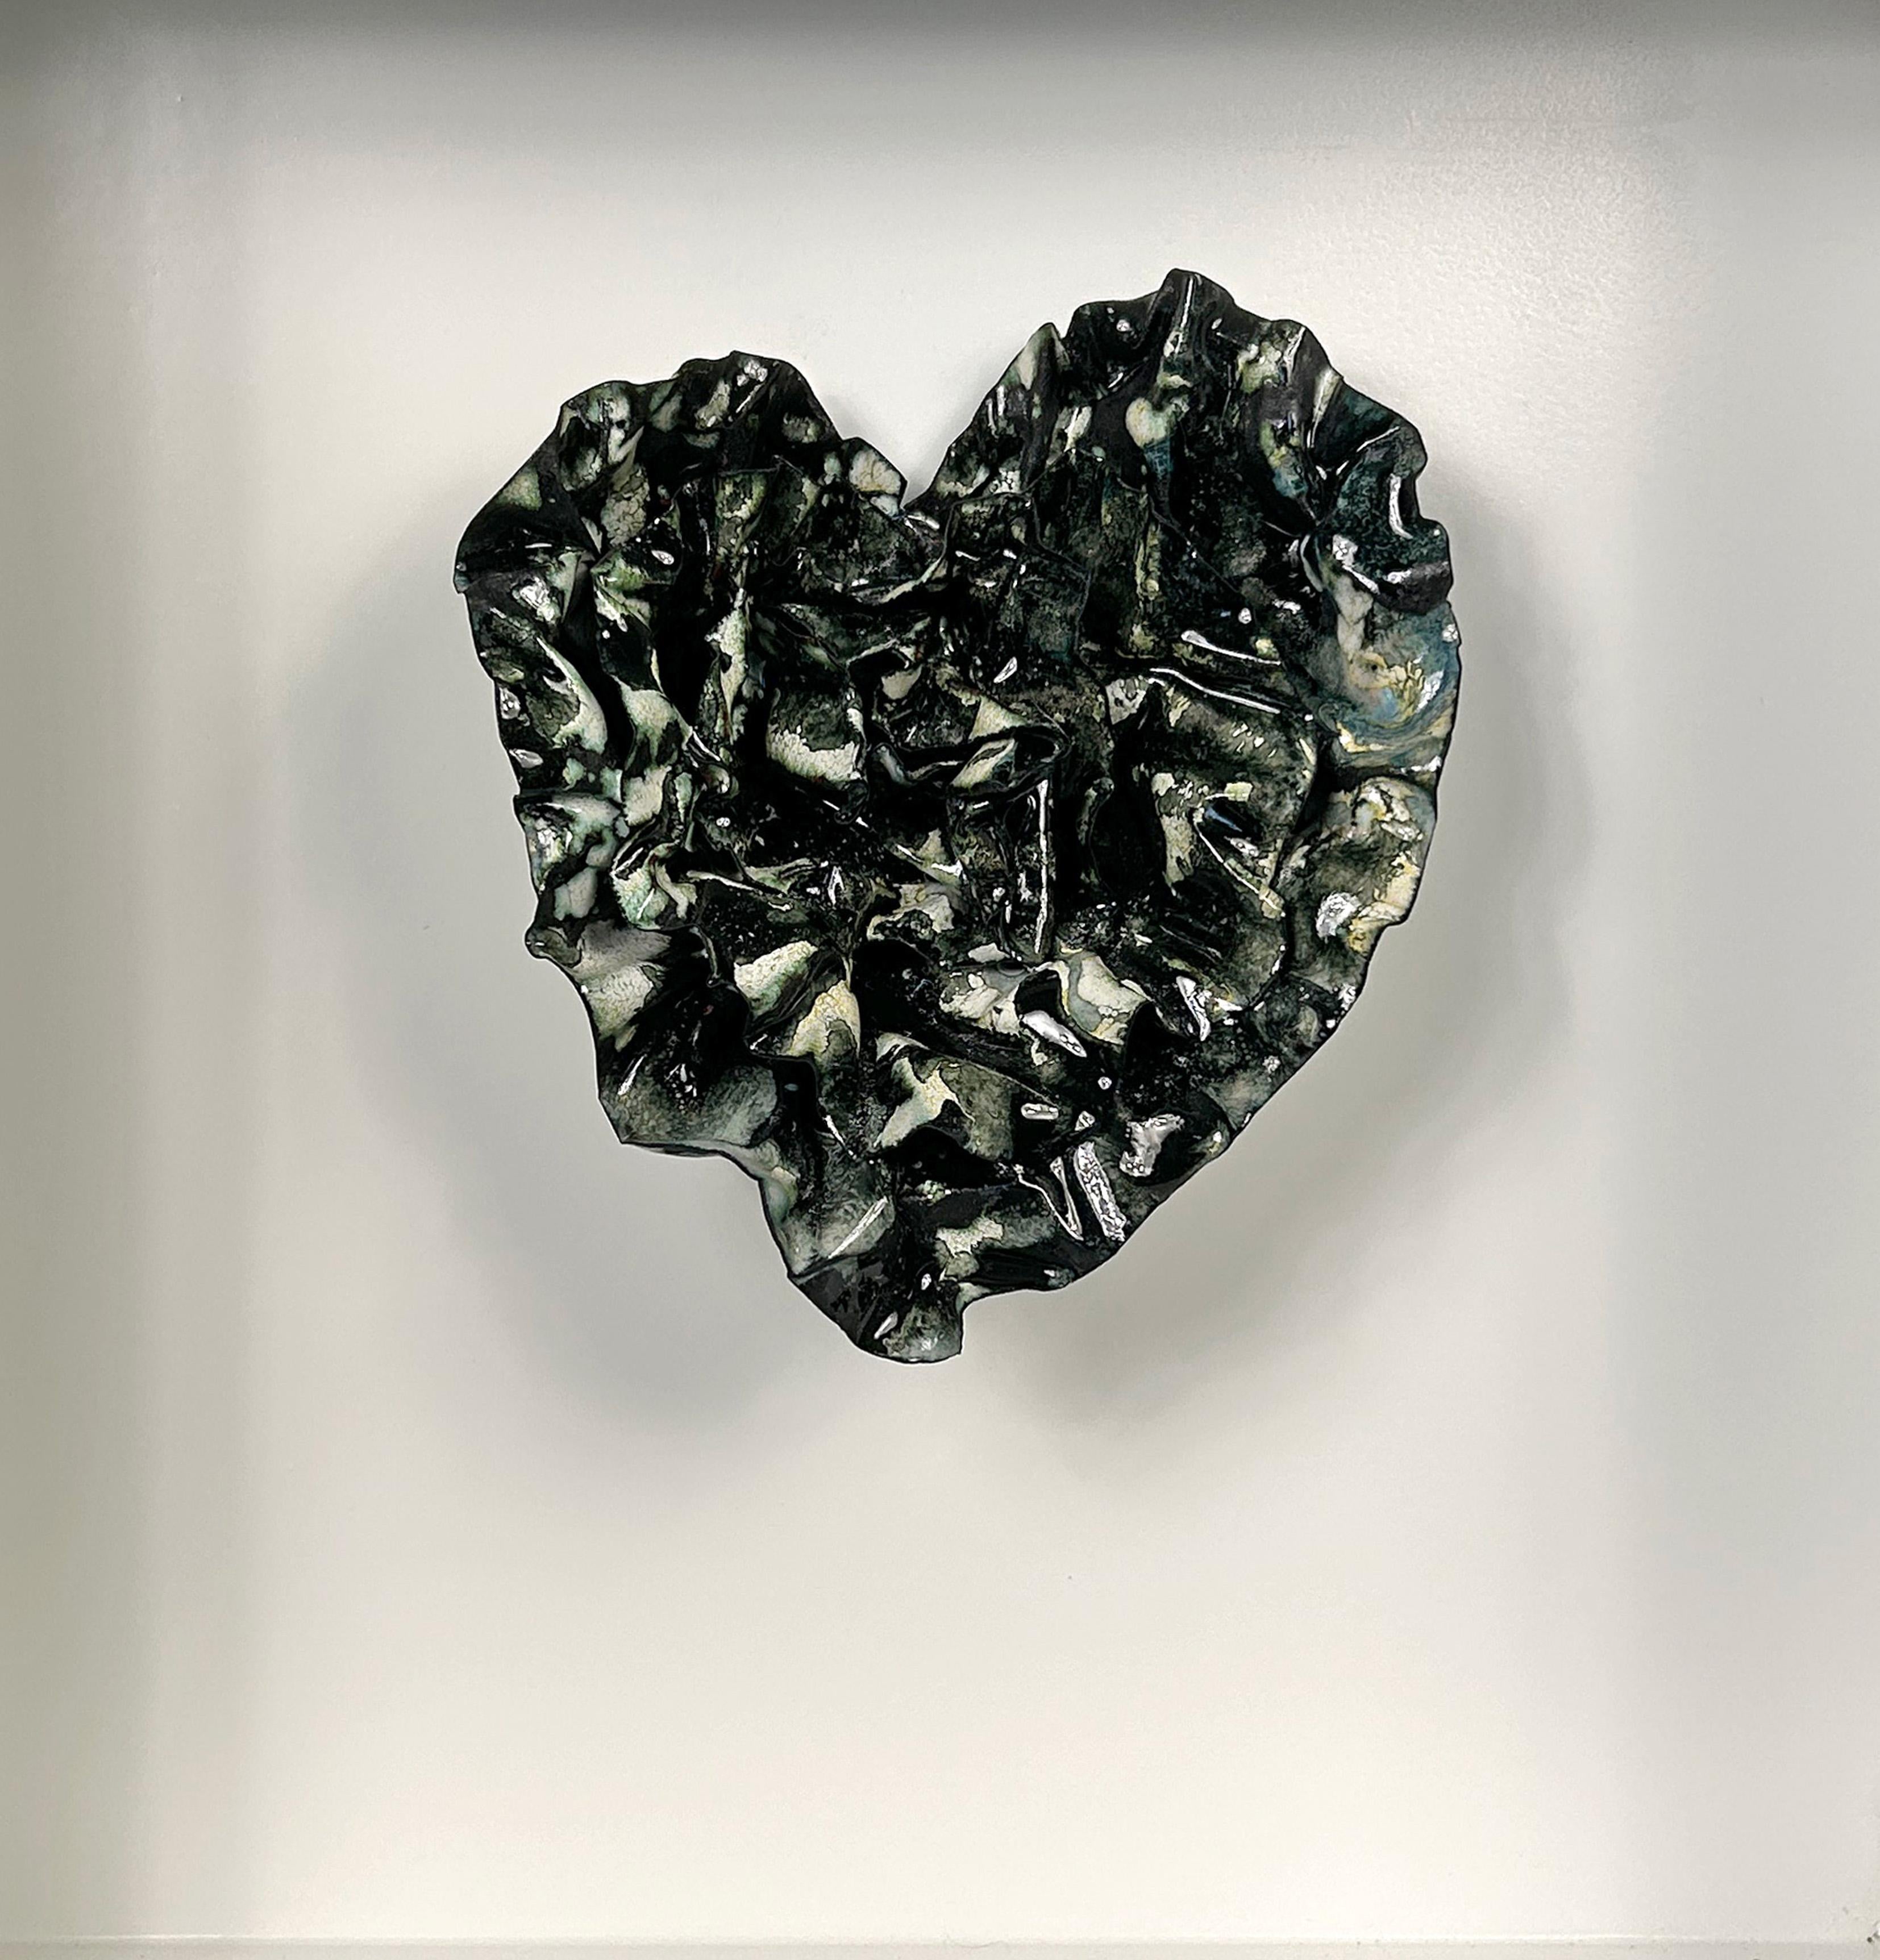 Black Tapestry is a heart shaped enameled sculpture that captivates with its intricate patterns and textures, reminiscent of a richly woven abstract tapestry.
Black Tapestry is an evolution of patterns that swirl with different textures and patterns